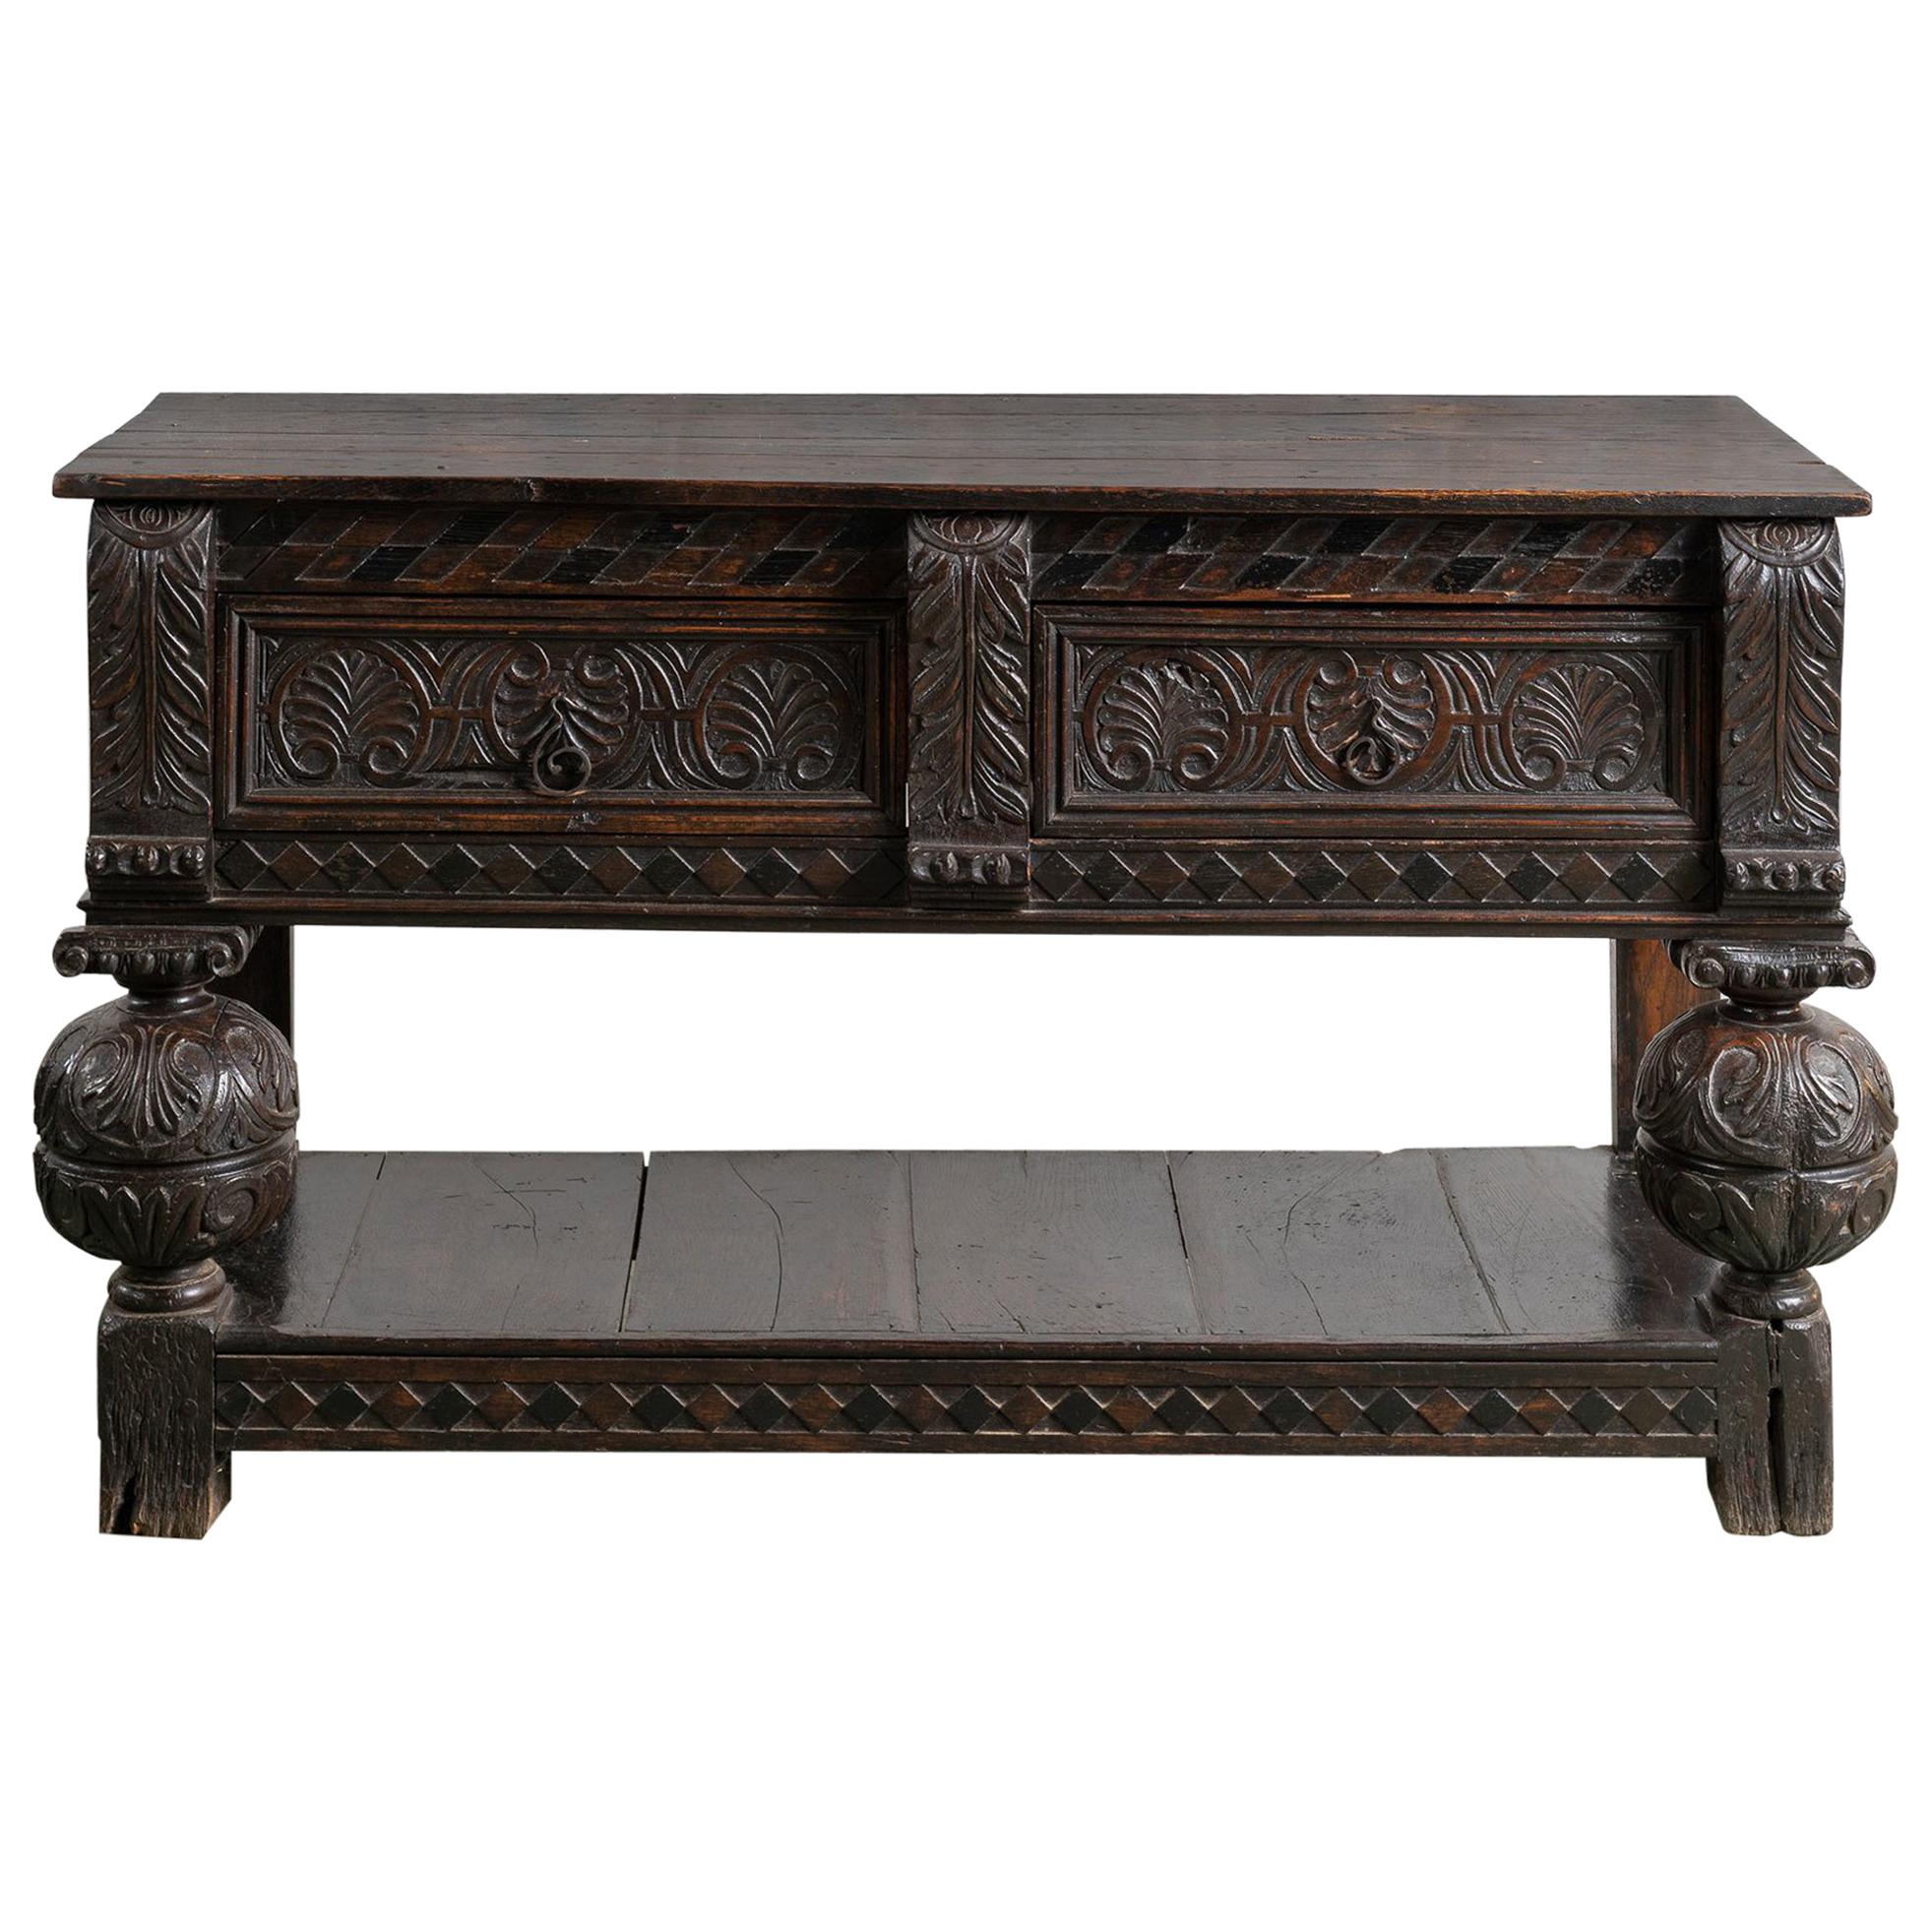 Renaissance Revival Carved Walnut Console Table, circa 19th Century